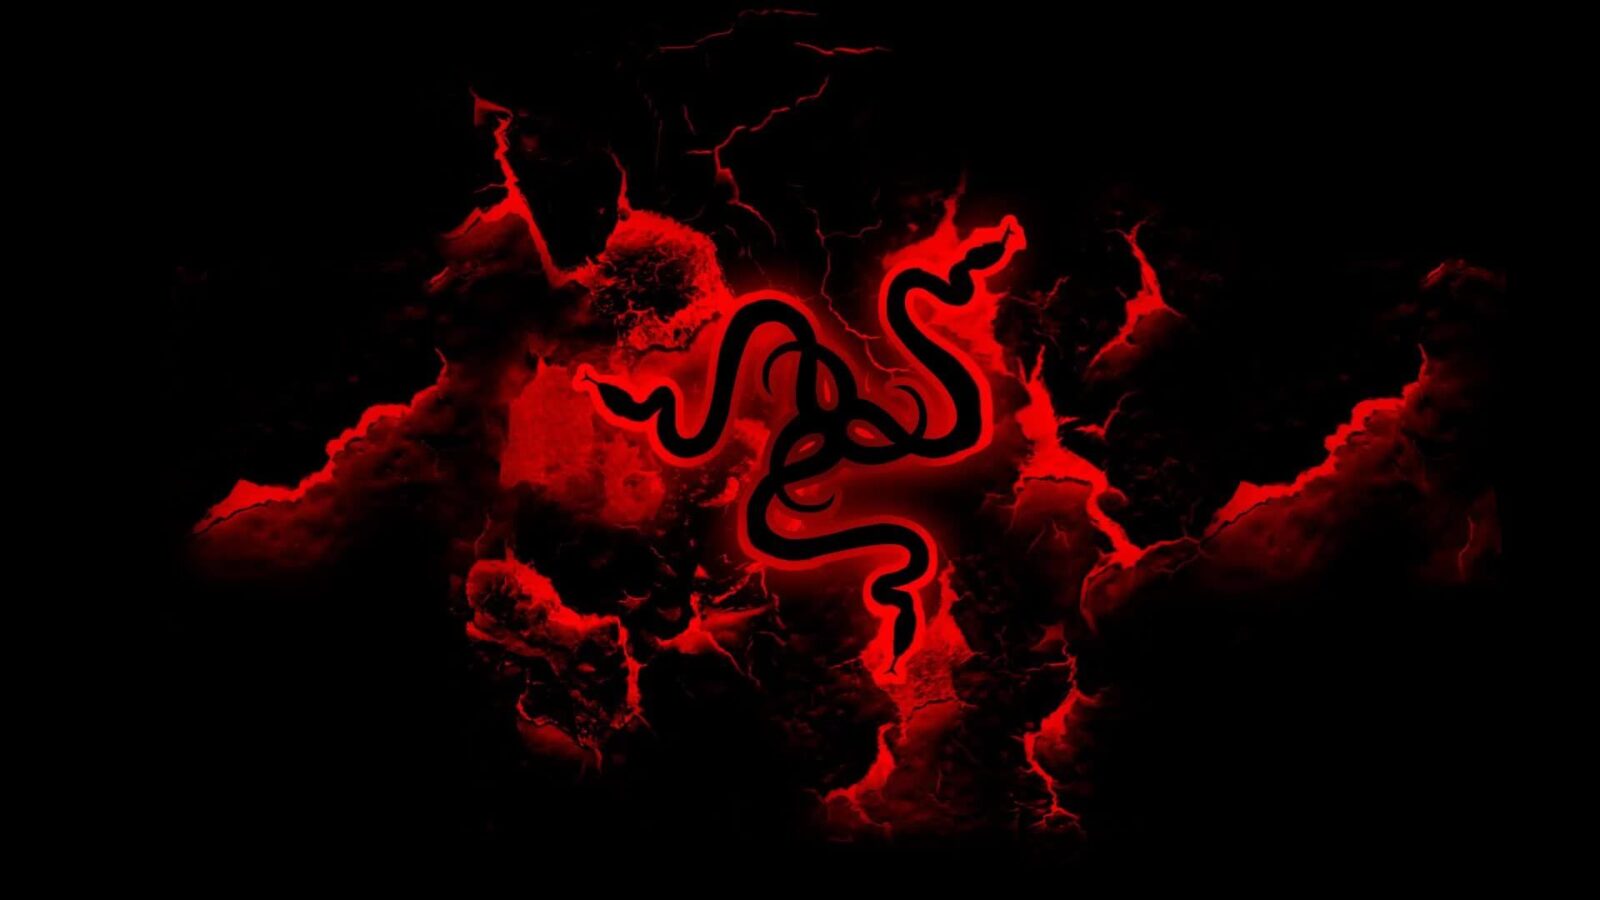 LiveWallpapers4Free.com | Razer Gaming Brand Abstract Red - Free Live Wallpaper